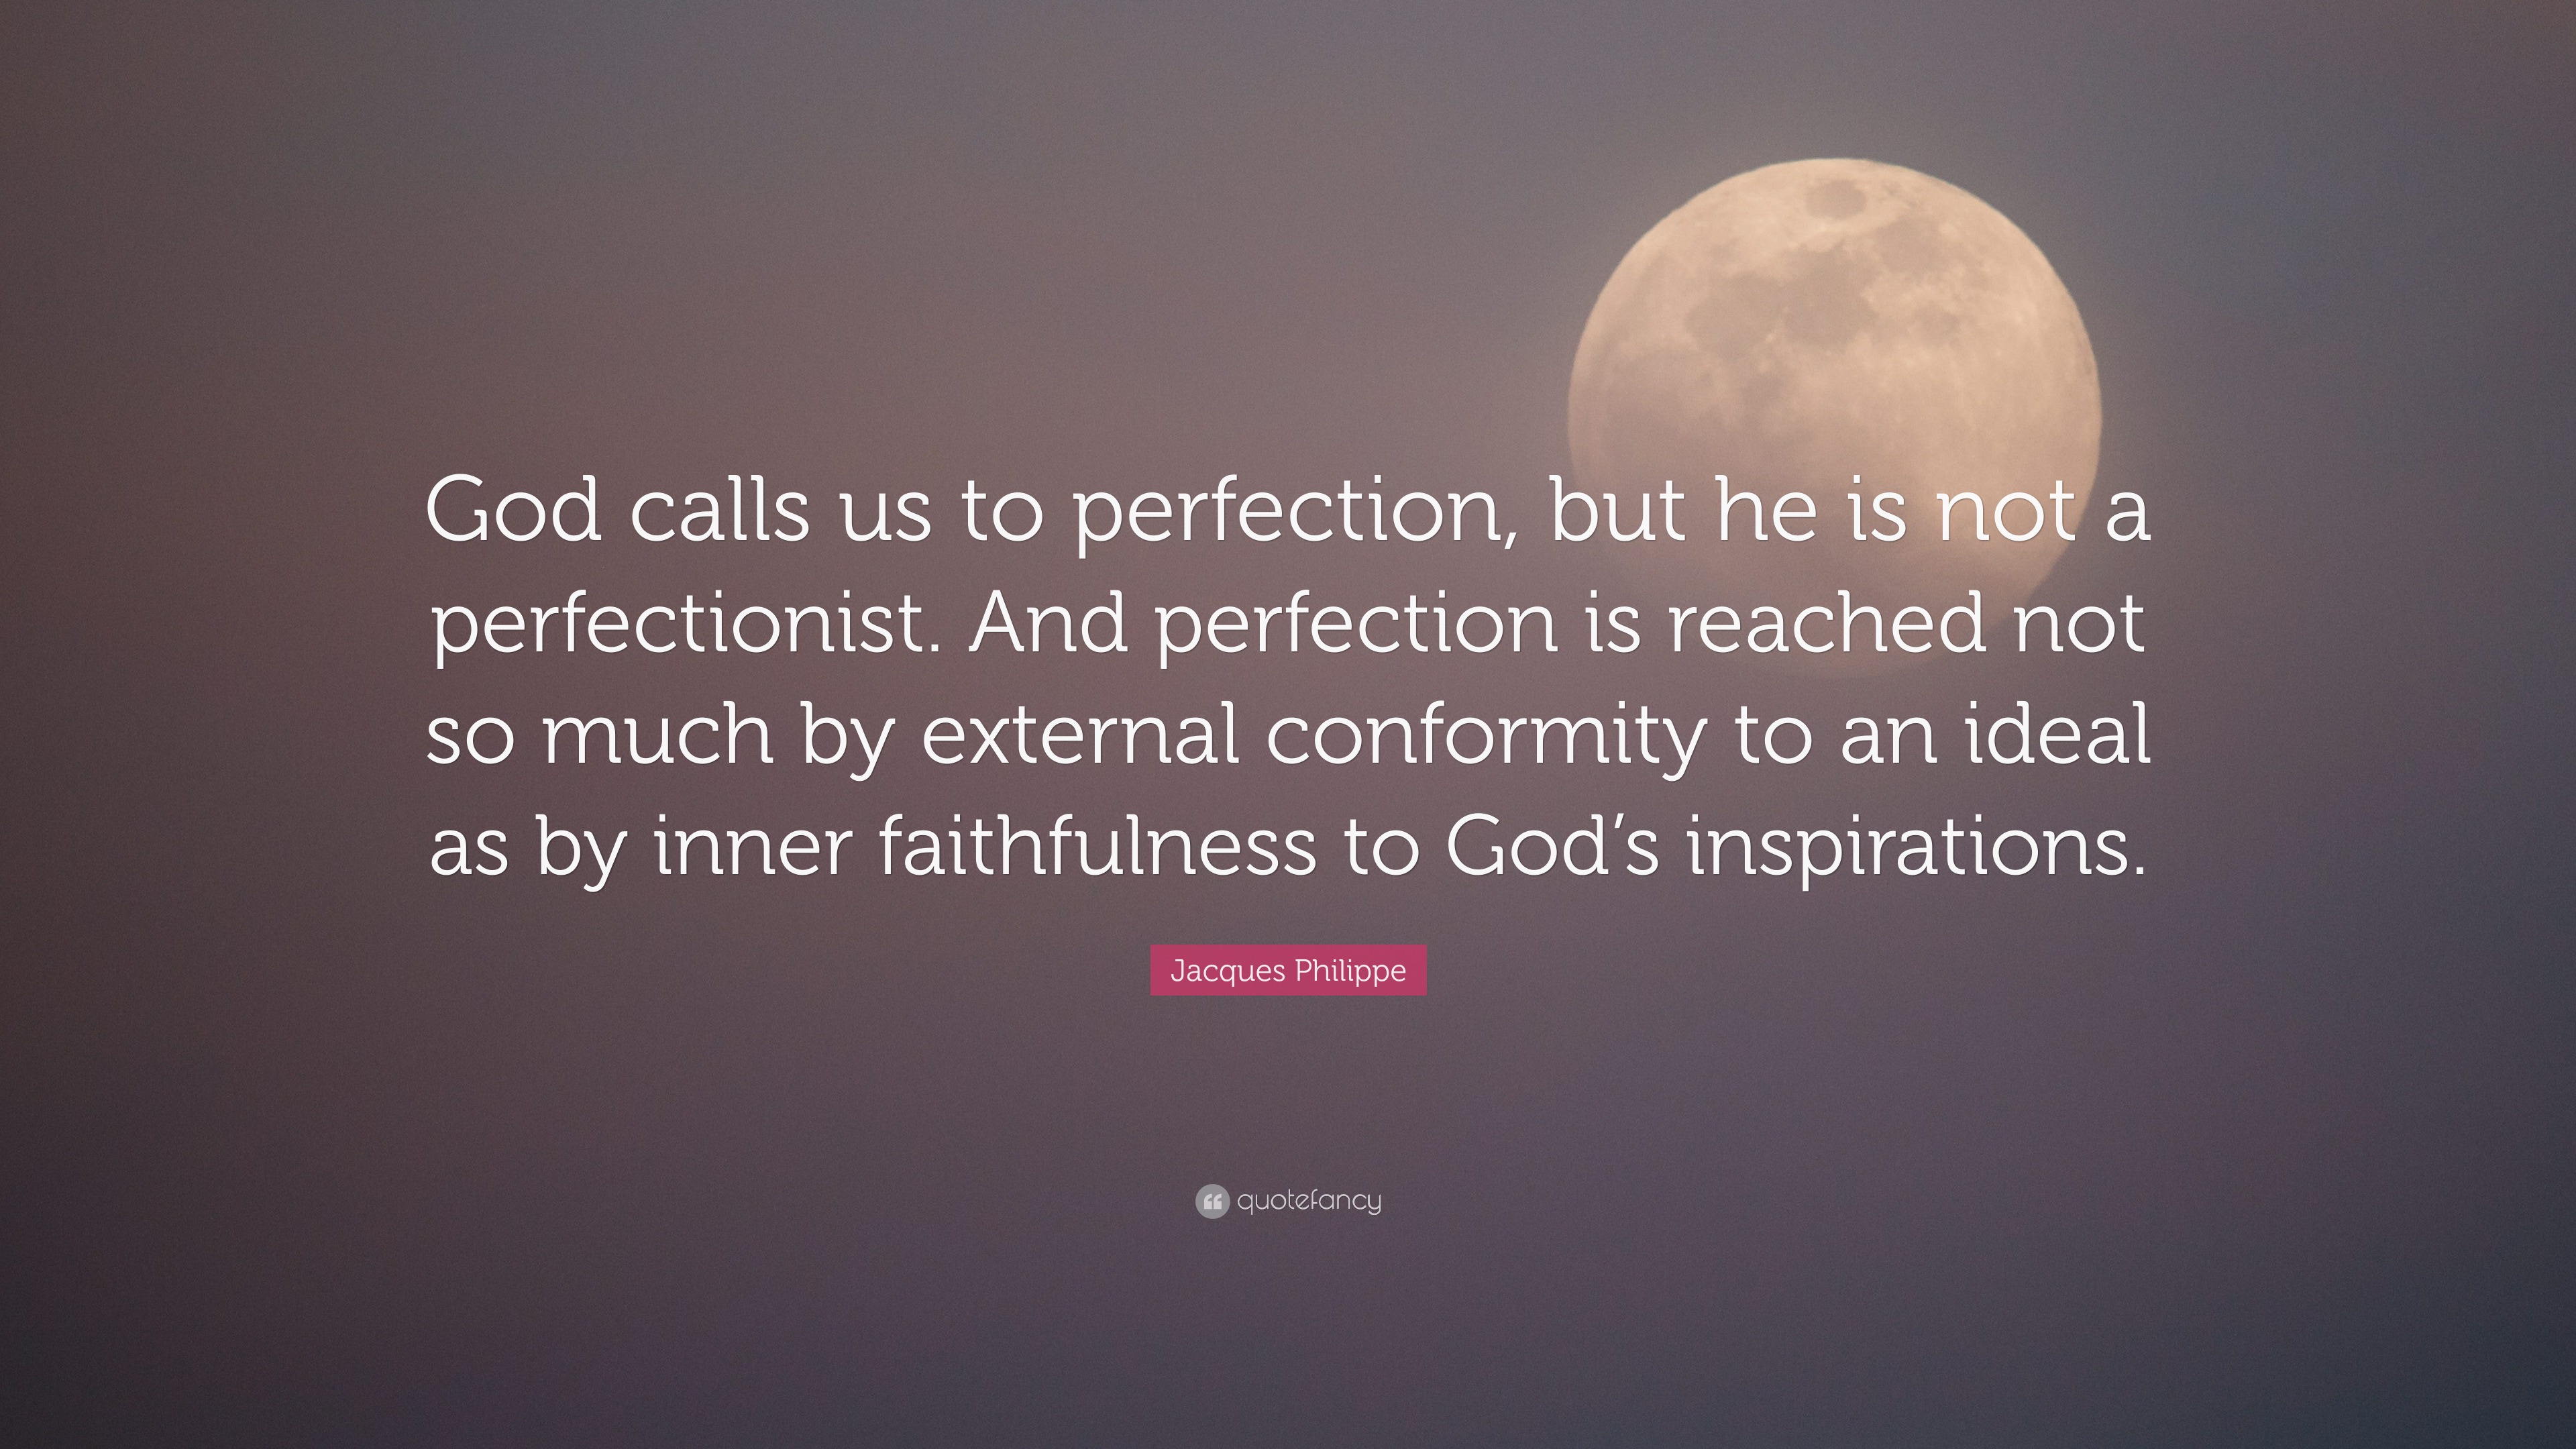 Jacques Philippe Quote: “God calls us to perfection, but he is not a ...